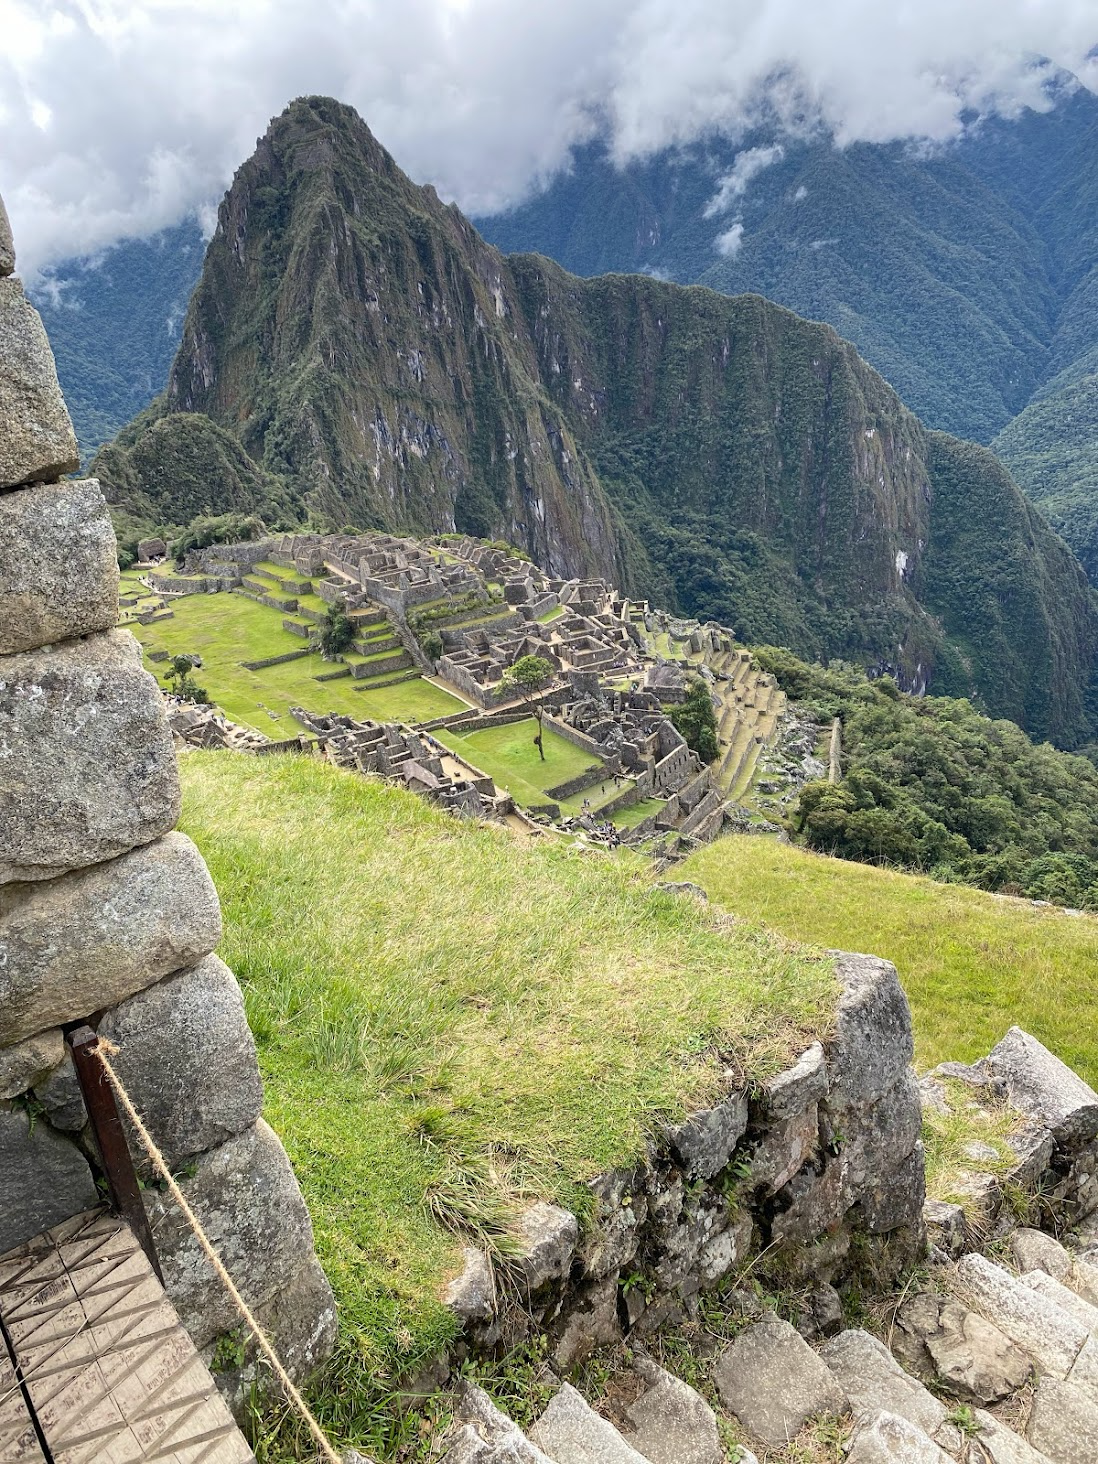 A photo of the various sets of stairs visible along the hike to the summit of Machu Picchu